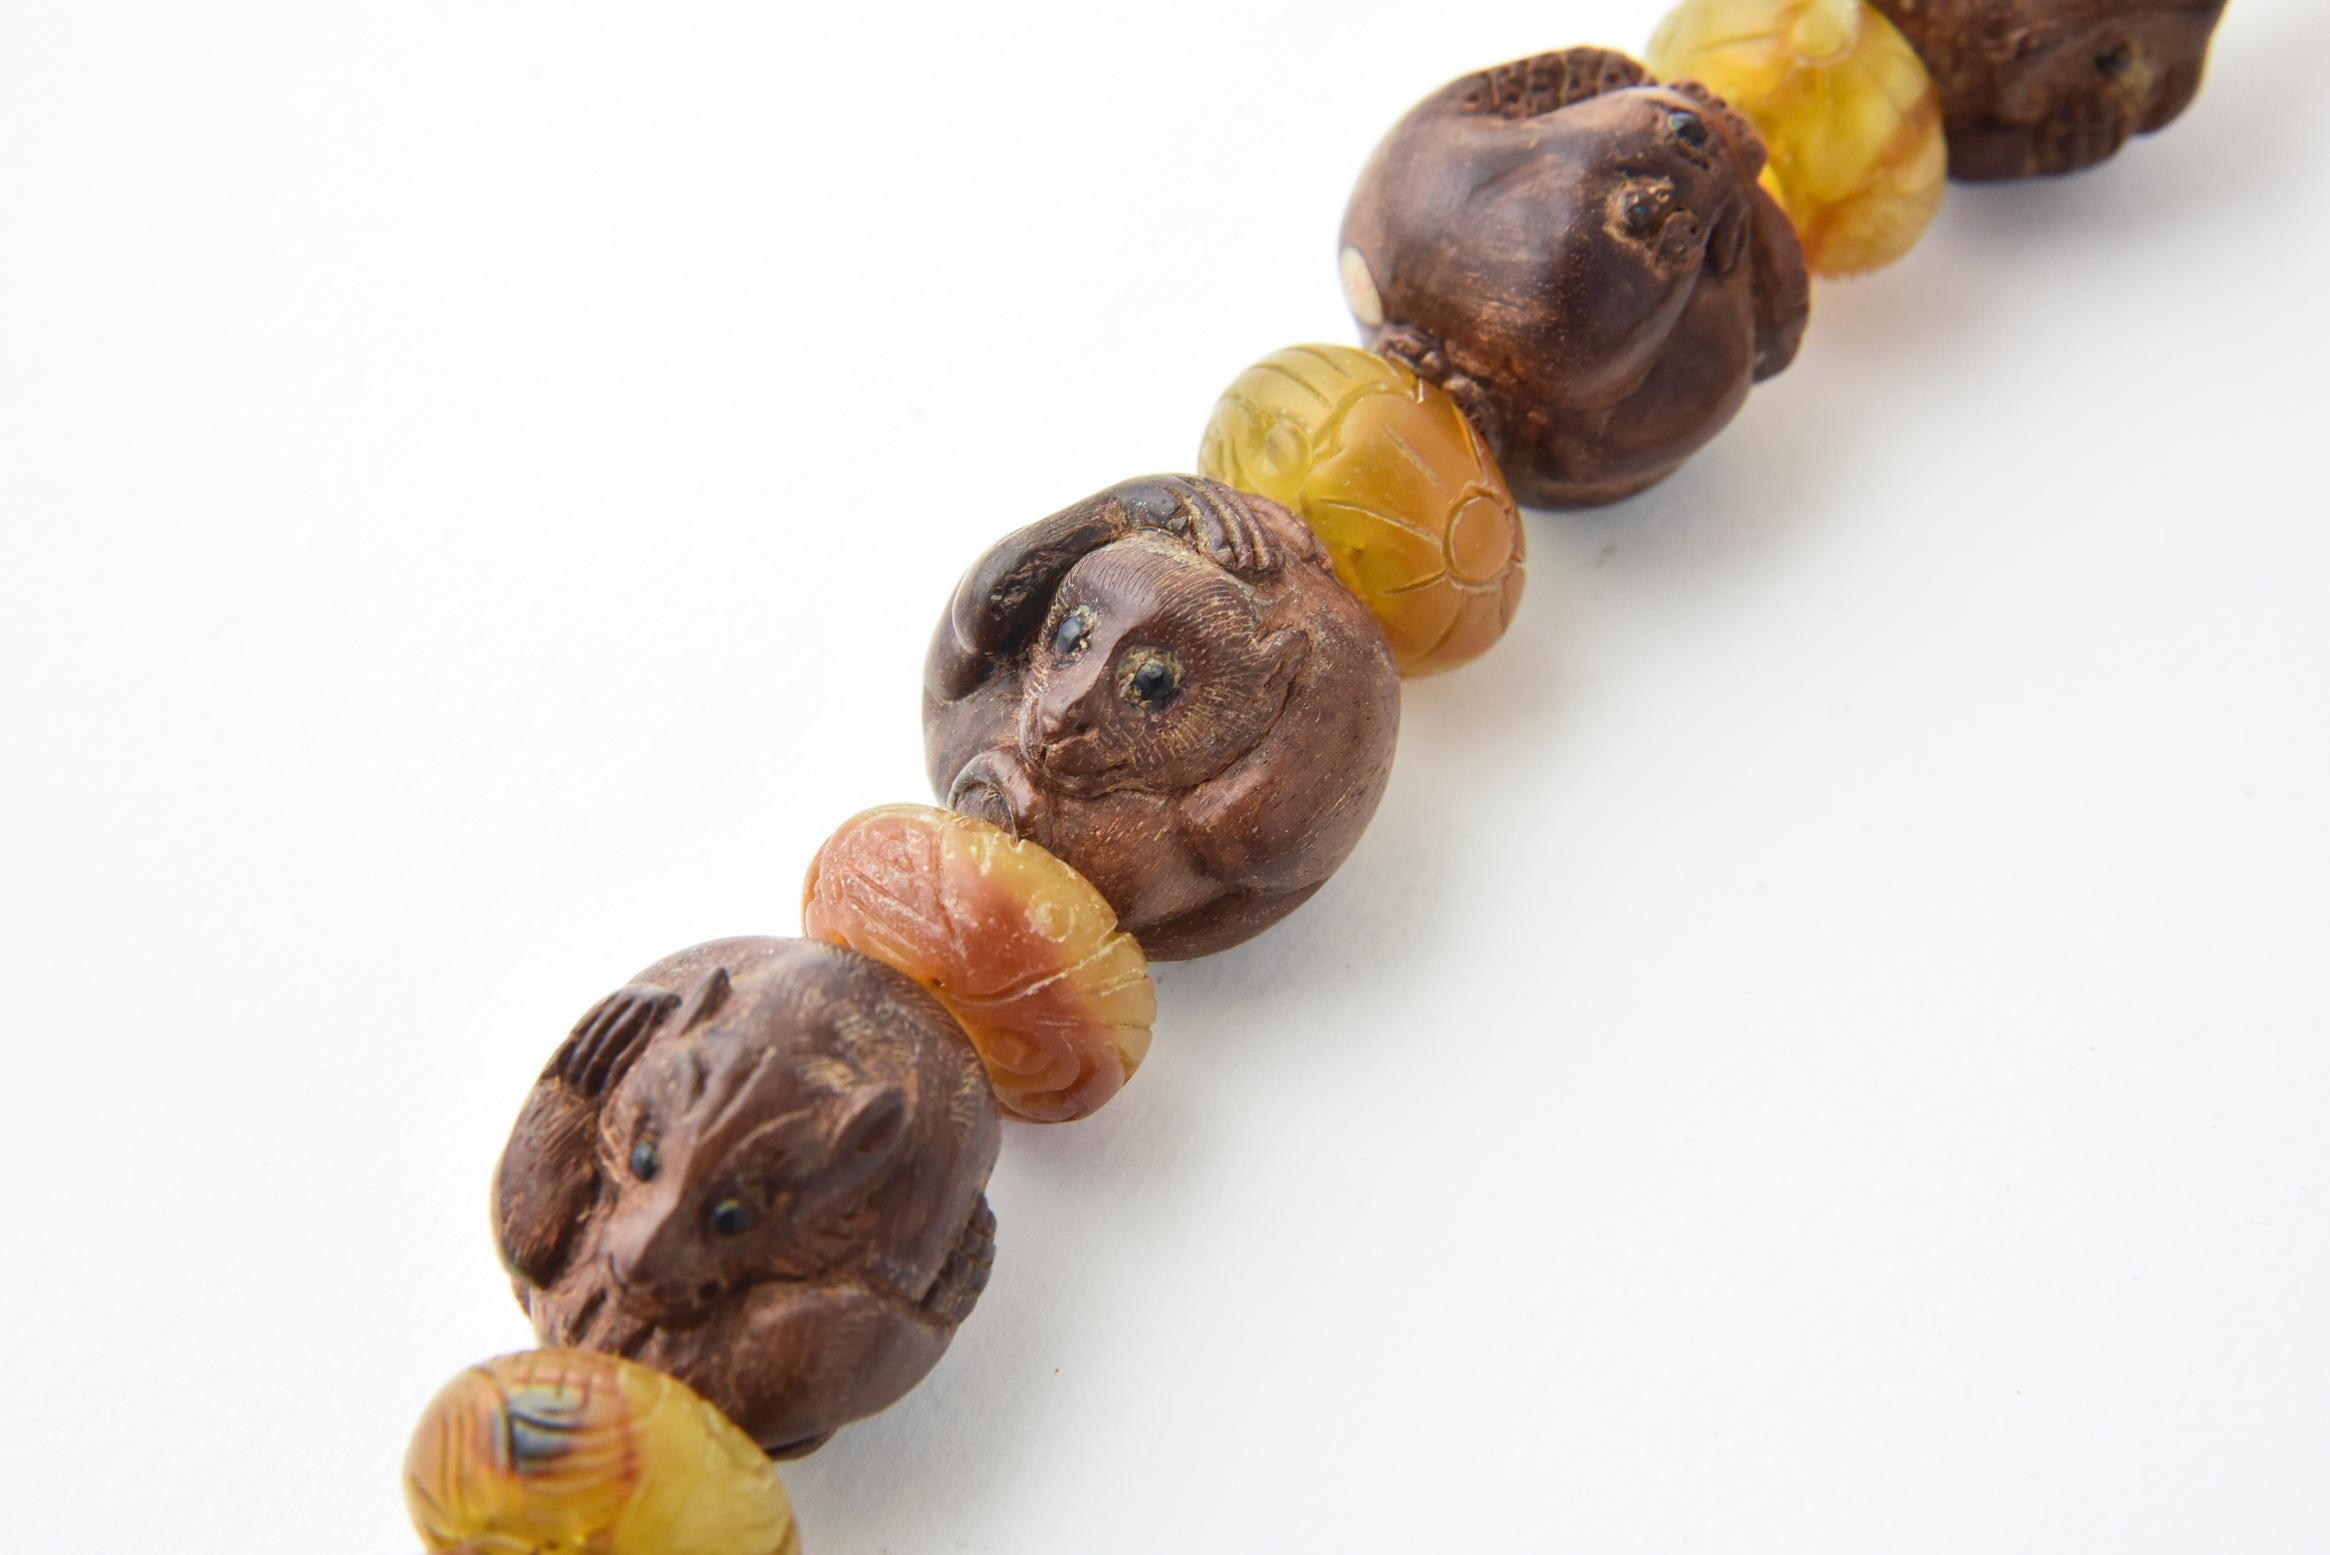 This beautiful Chinese Ojime necklace is made of carved nuts handcrafted into 12 Zodiac animal beads with onyx eyes.  The bead size ranges from 23 - 24mm.  The 12 zodiac animals include:  rat, ox, tiger, rabbit, dragon, snake, horse, goat, monkey,